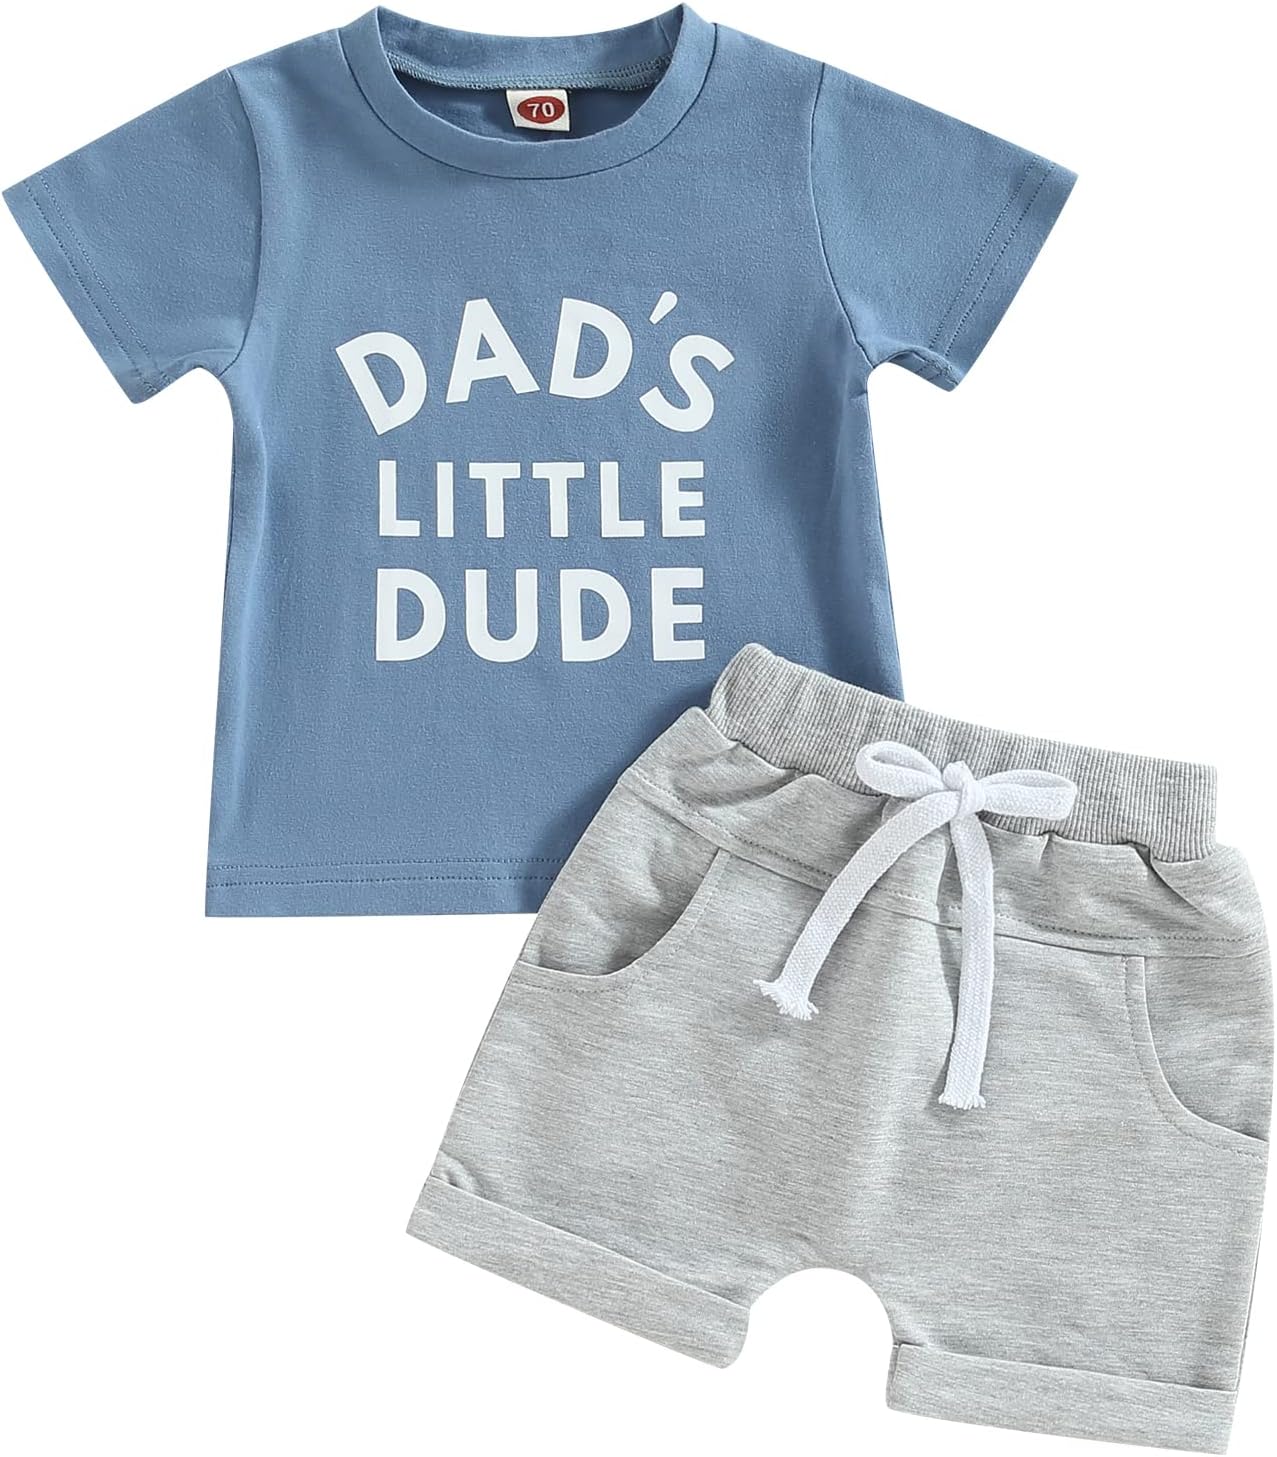 Daddys Boy Baby Clothes Dad’s Little Dude Short Sleeve Shirts and Drawstring Shorts Toddler Summer Cute Outfit